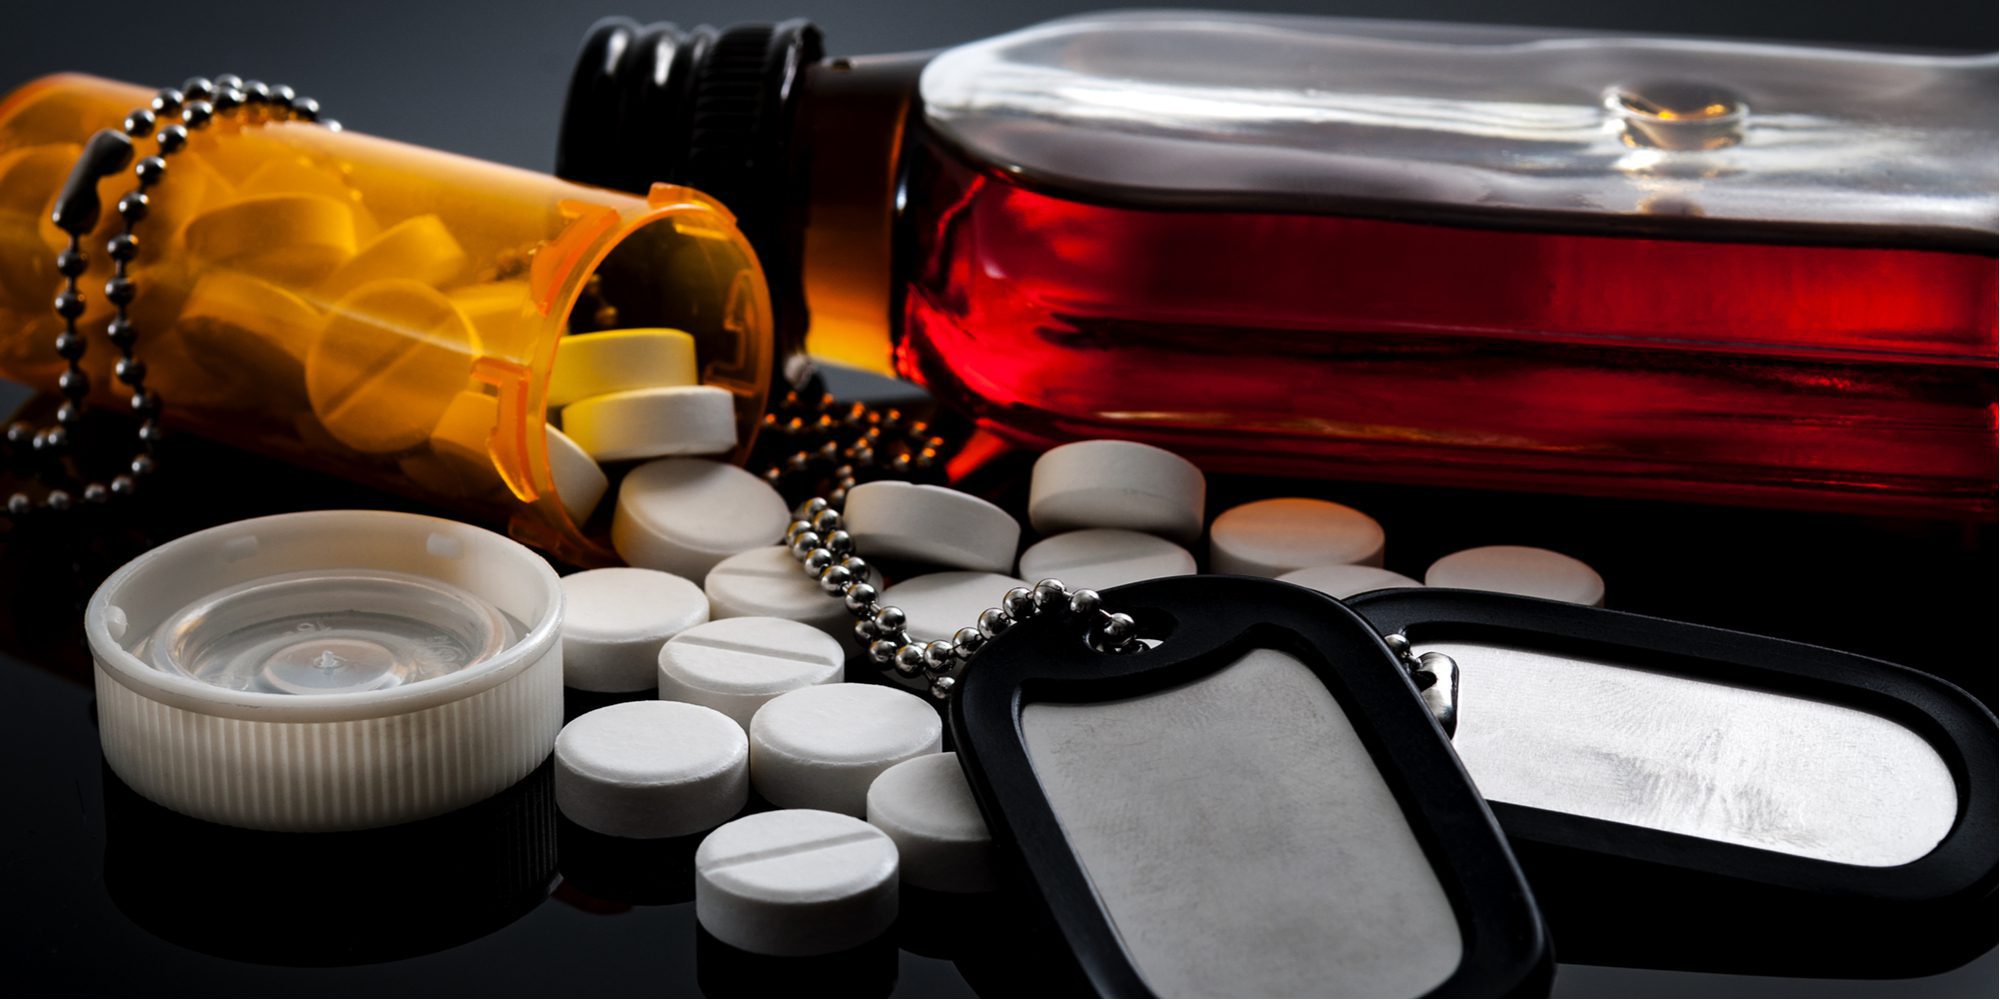 Vicodin: Addiction, Uses, and Recovery for Veterans